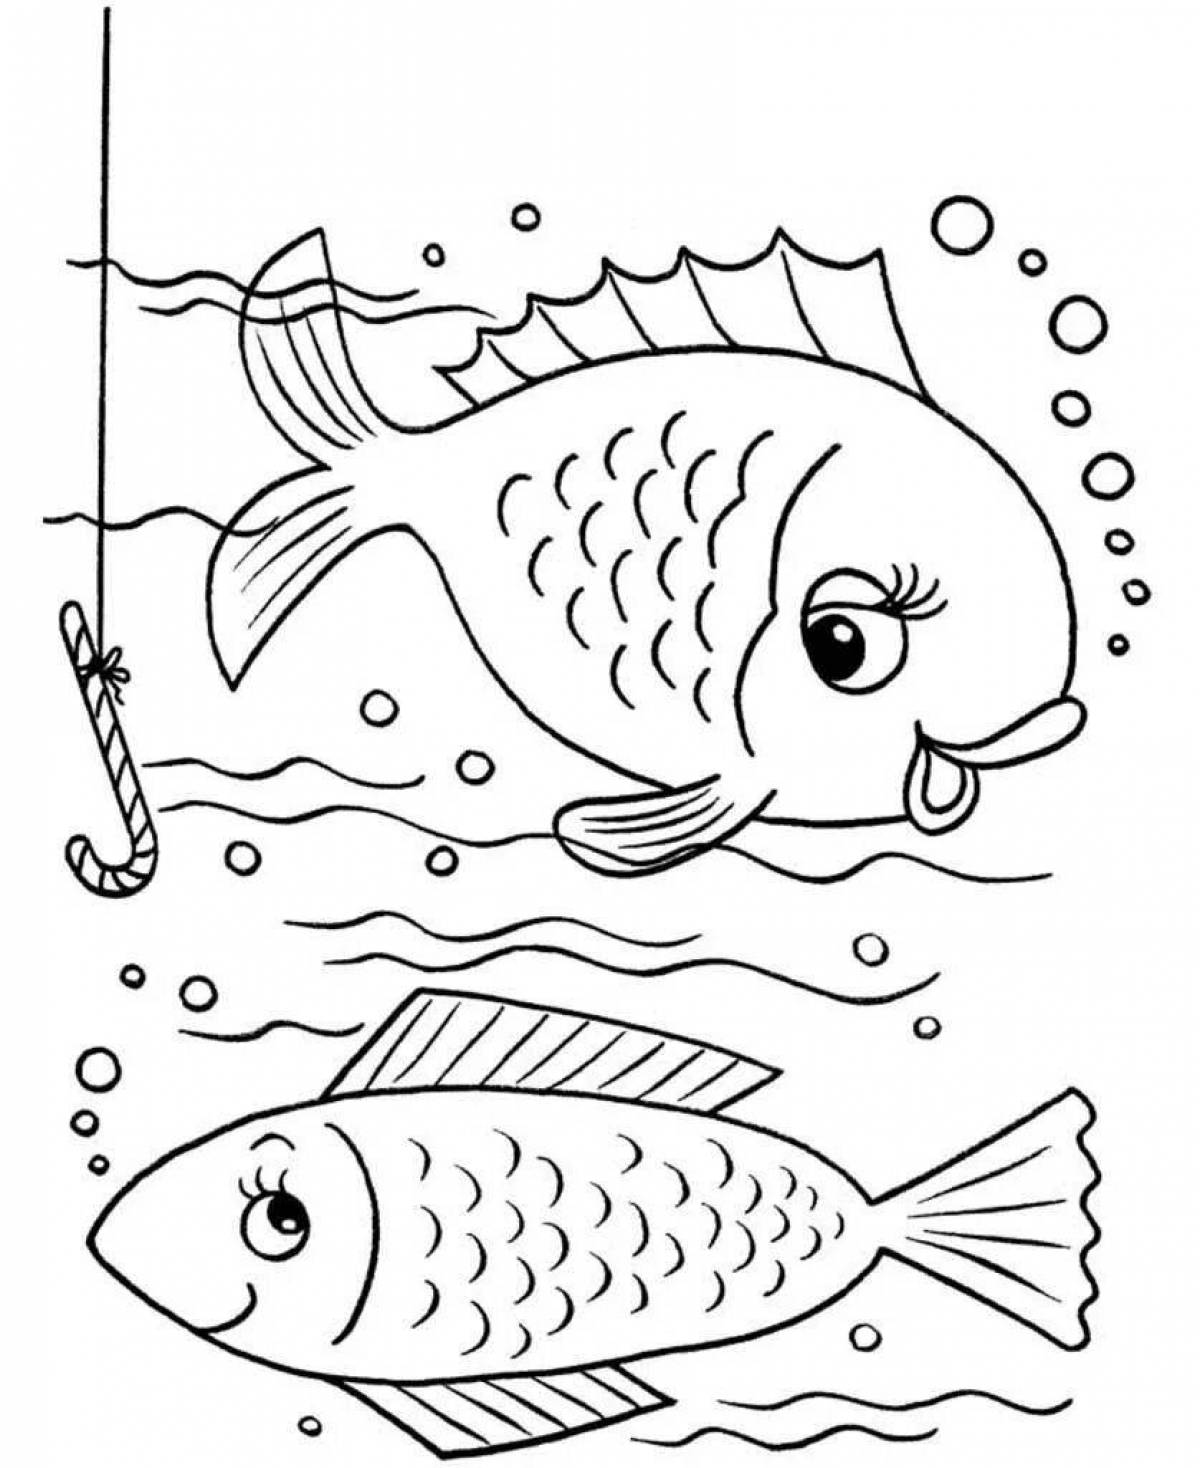 Coloring page magnificent balyktar